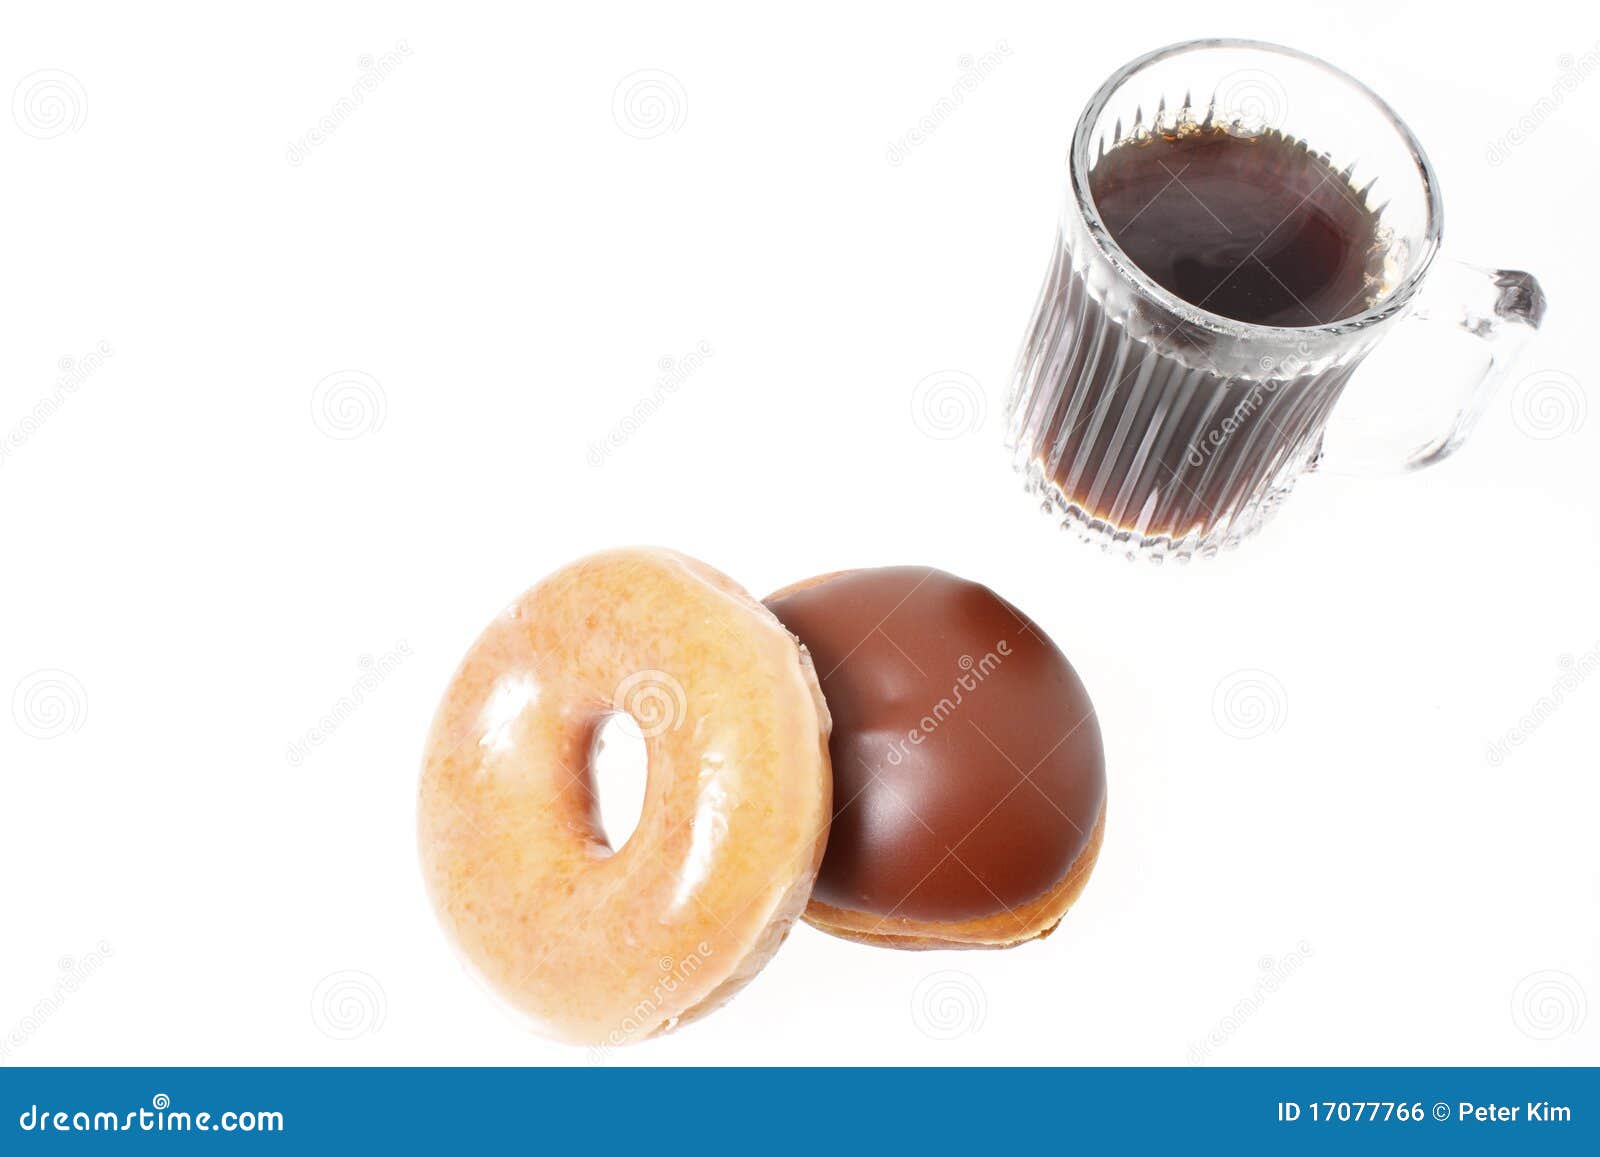 California Donut Shop Businesses For Sale And Wanted To Buy Postings, Franchises And Opportunities